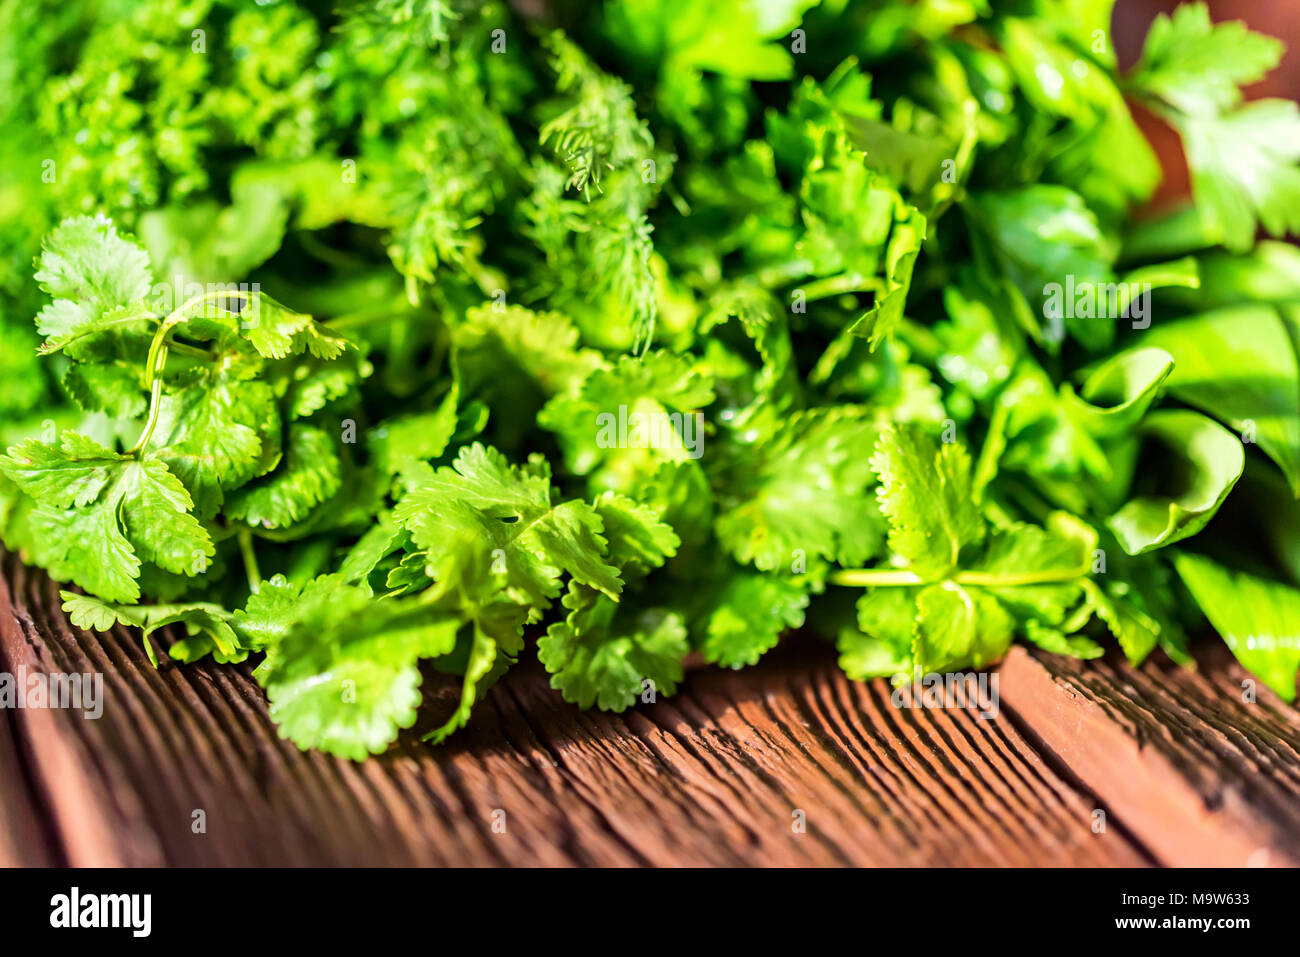 Fresh green cooking herbs on wooden background Stock Photo